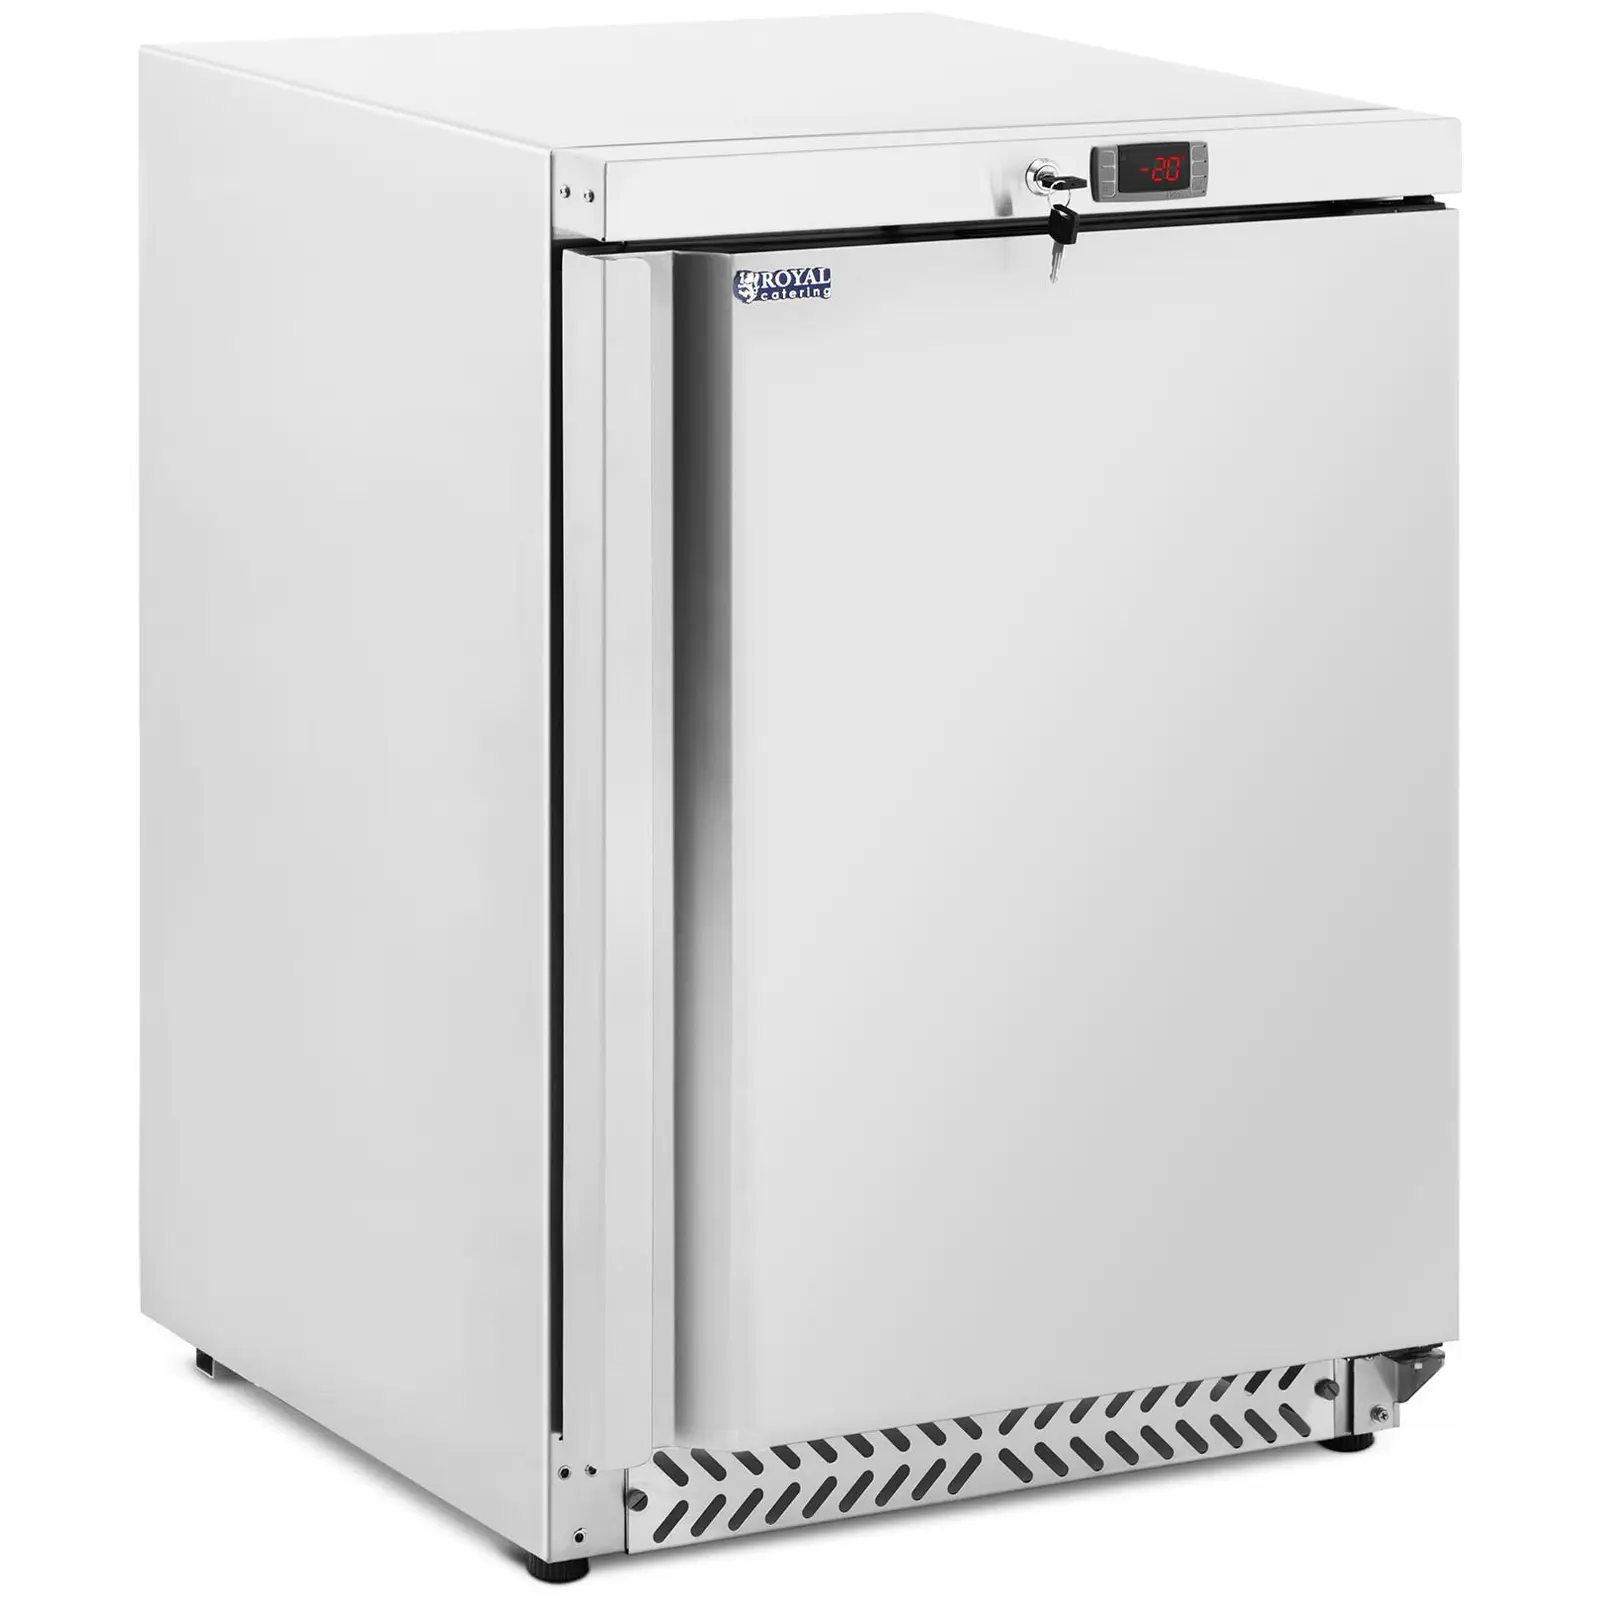 Freezer - 170 L - Royal Catering - Silver - refrigerant R600A